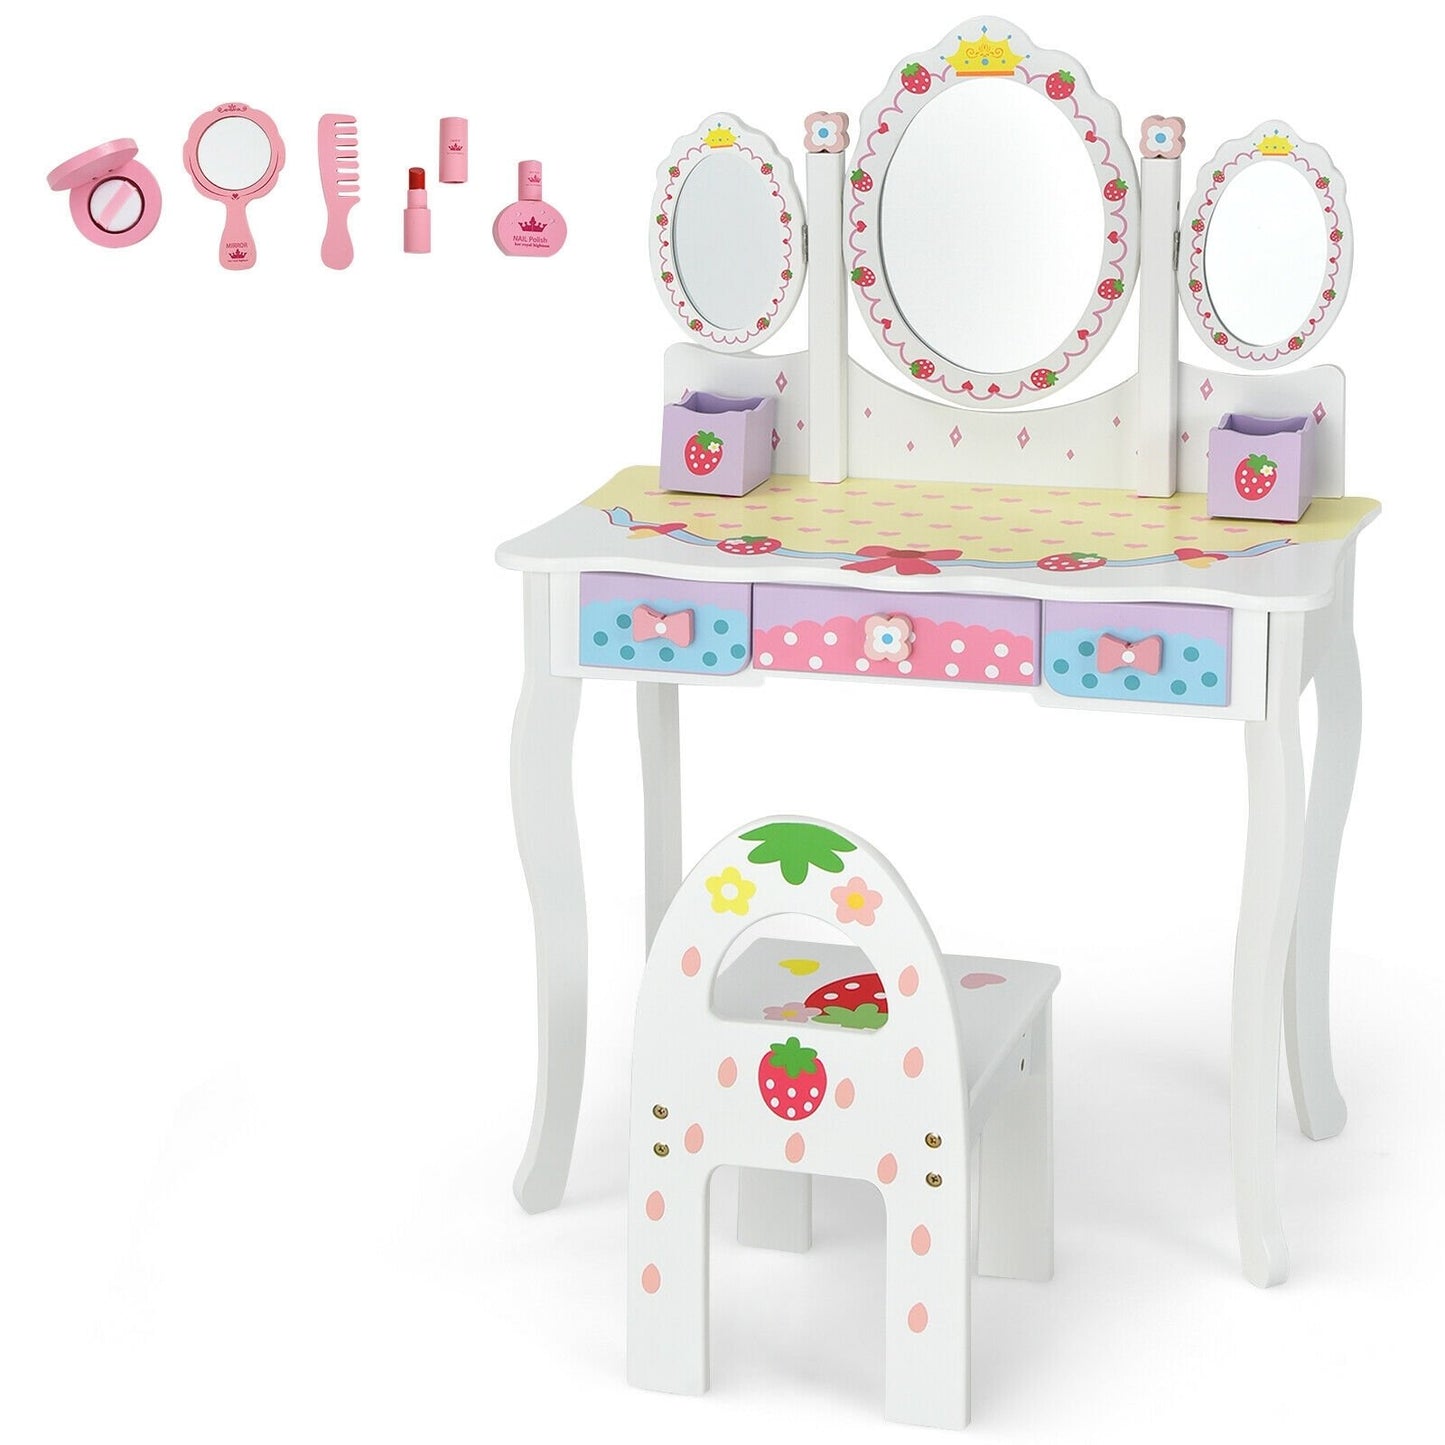 Kids Vanity Princess Makeup Dressing Table Chair Set with Tri-fold Mirror, White